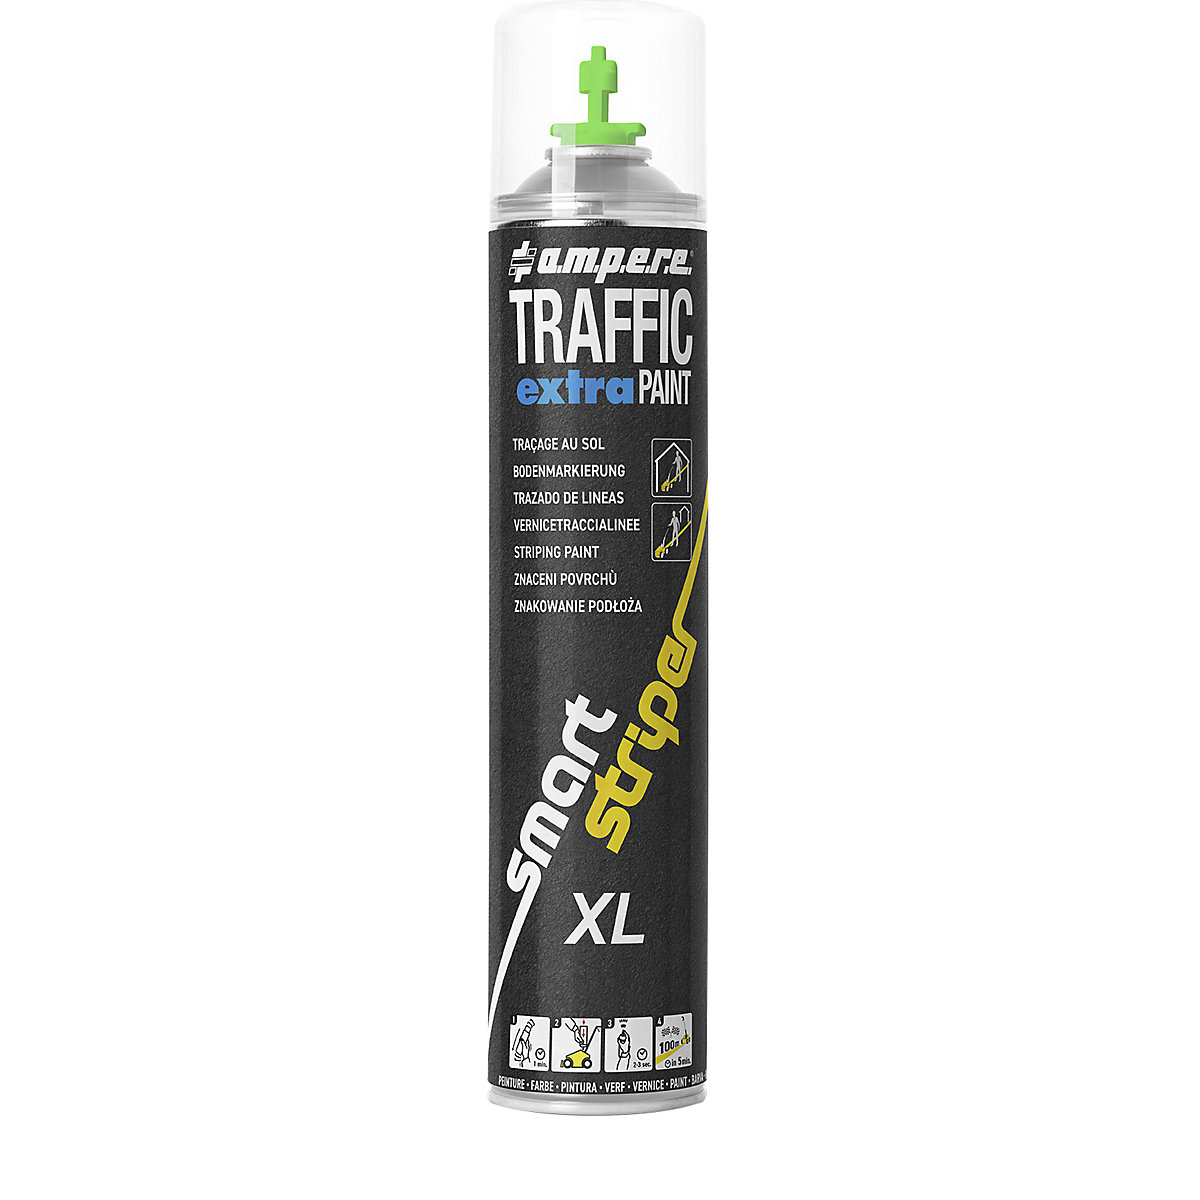 Traffic extra Paint® XL marking paint – Ampere, contents 750 ml, pack of 6, green-1